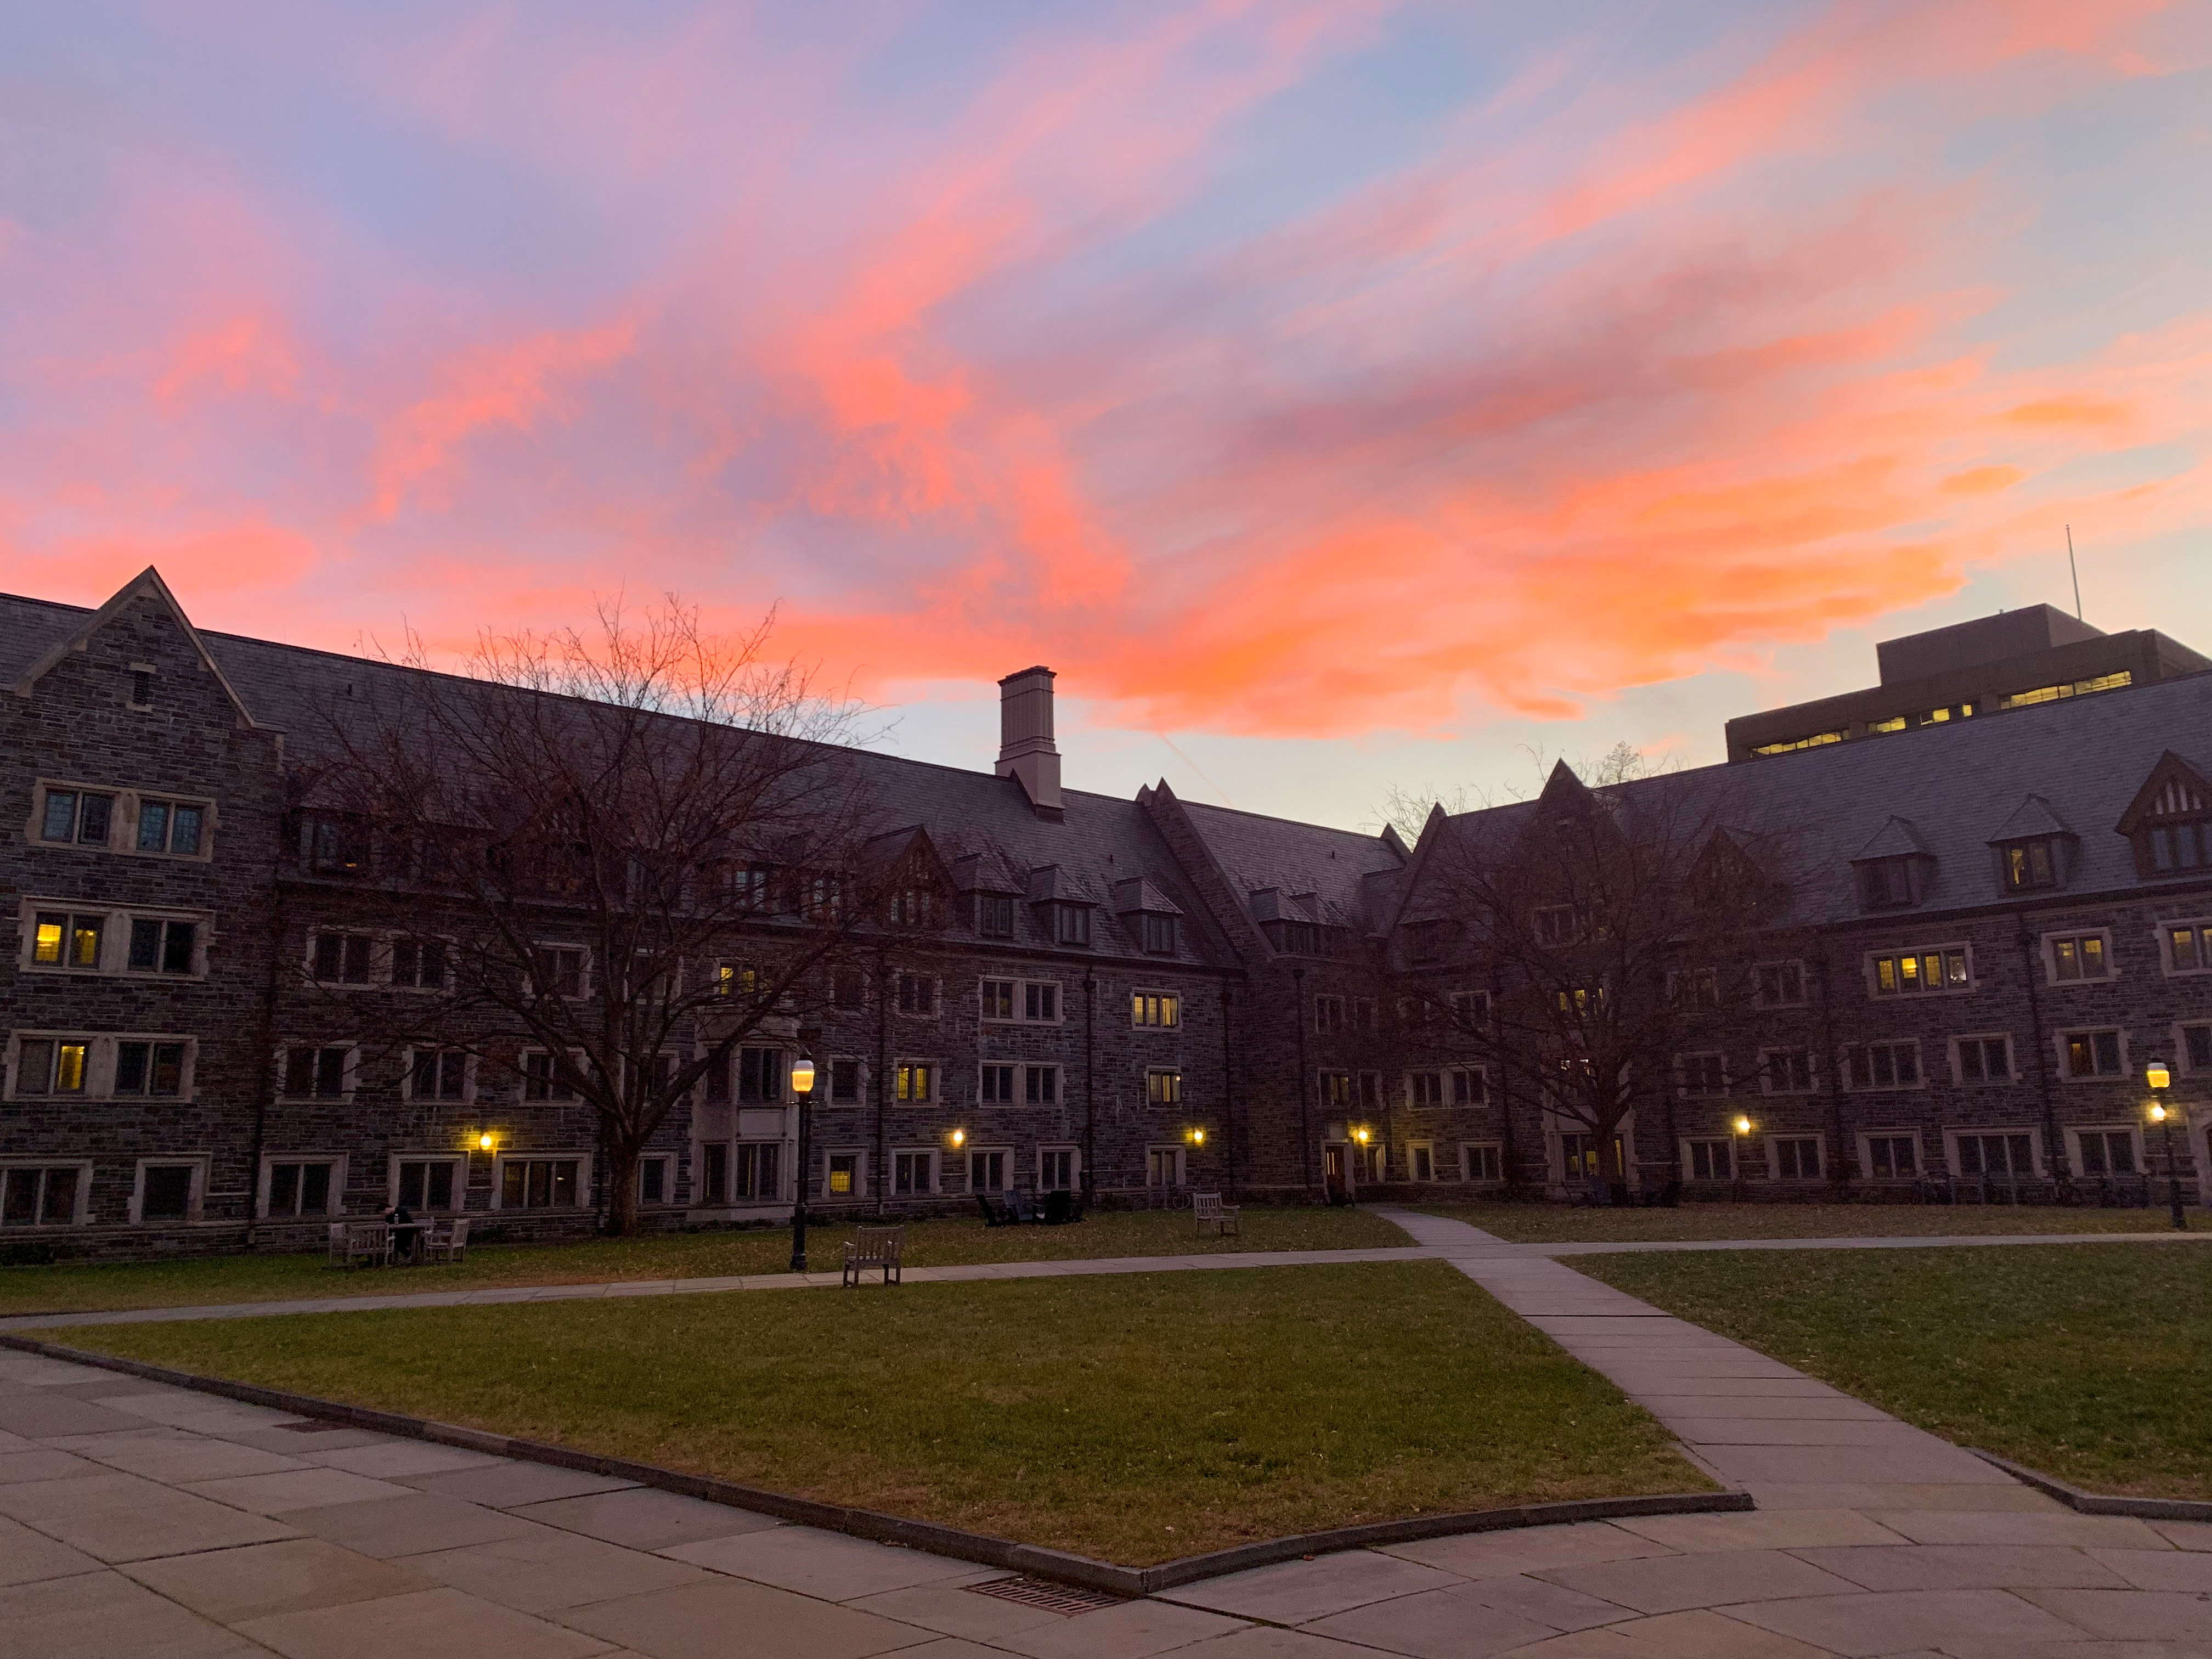 Whitman College at sunset